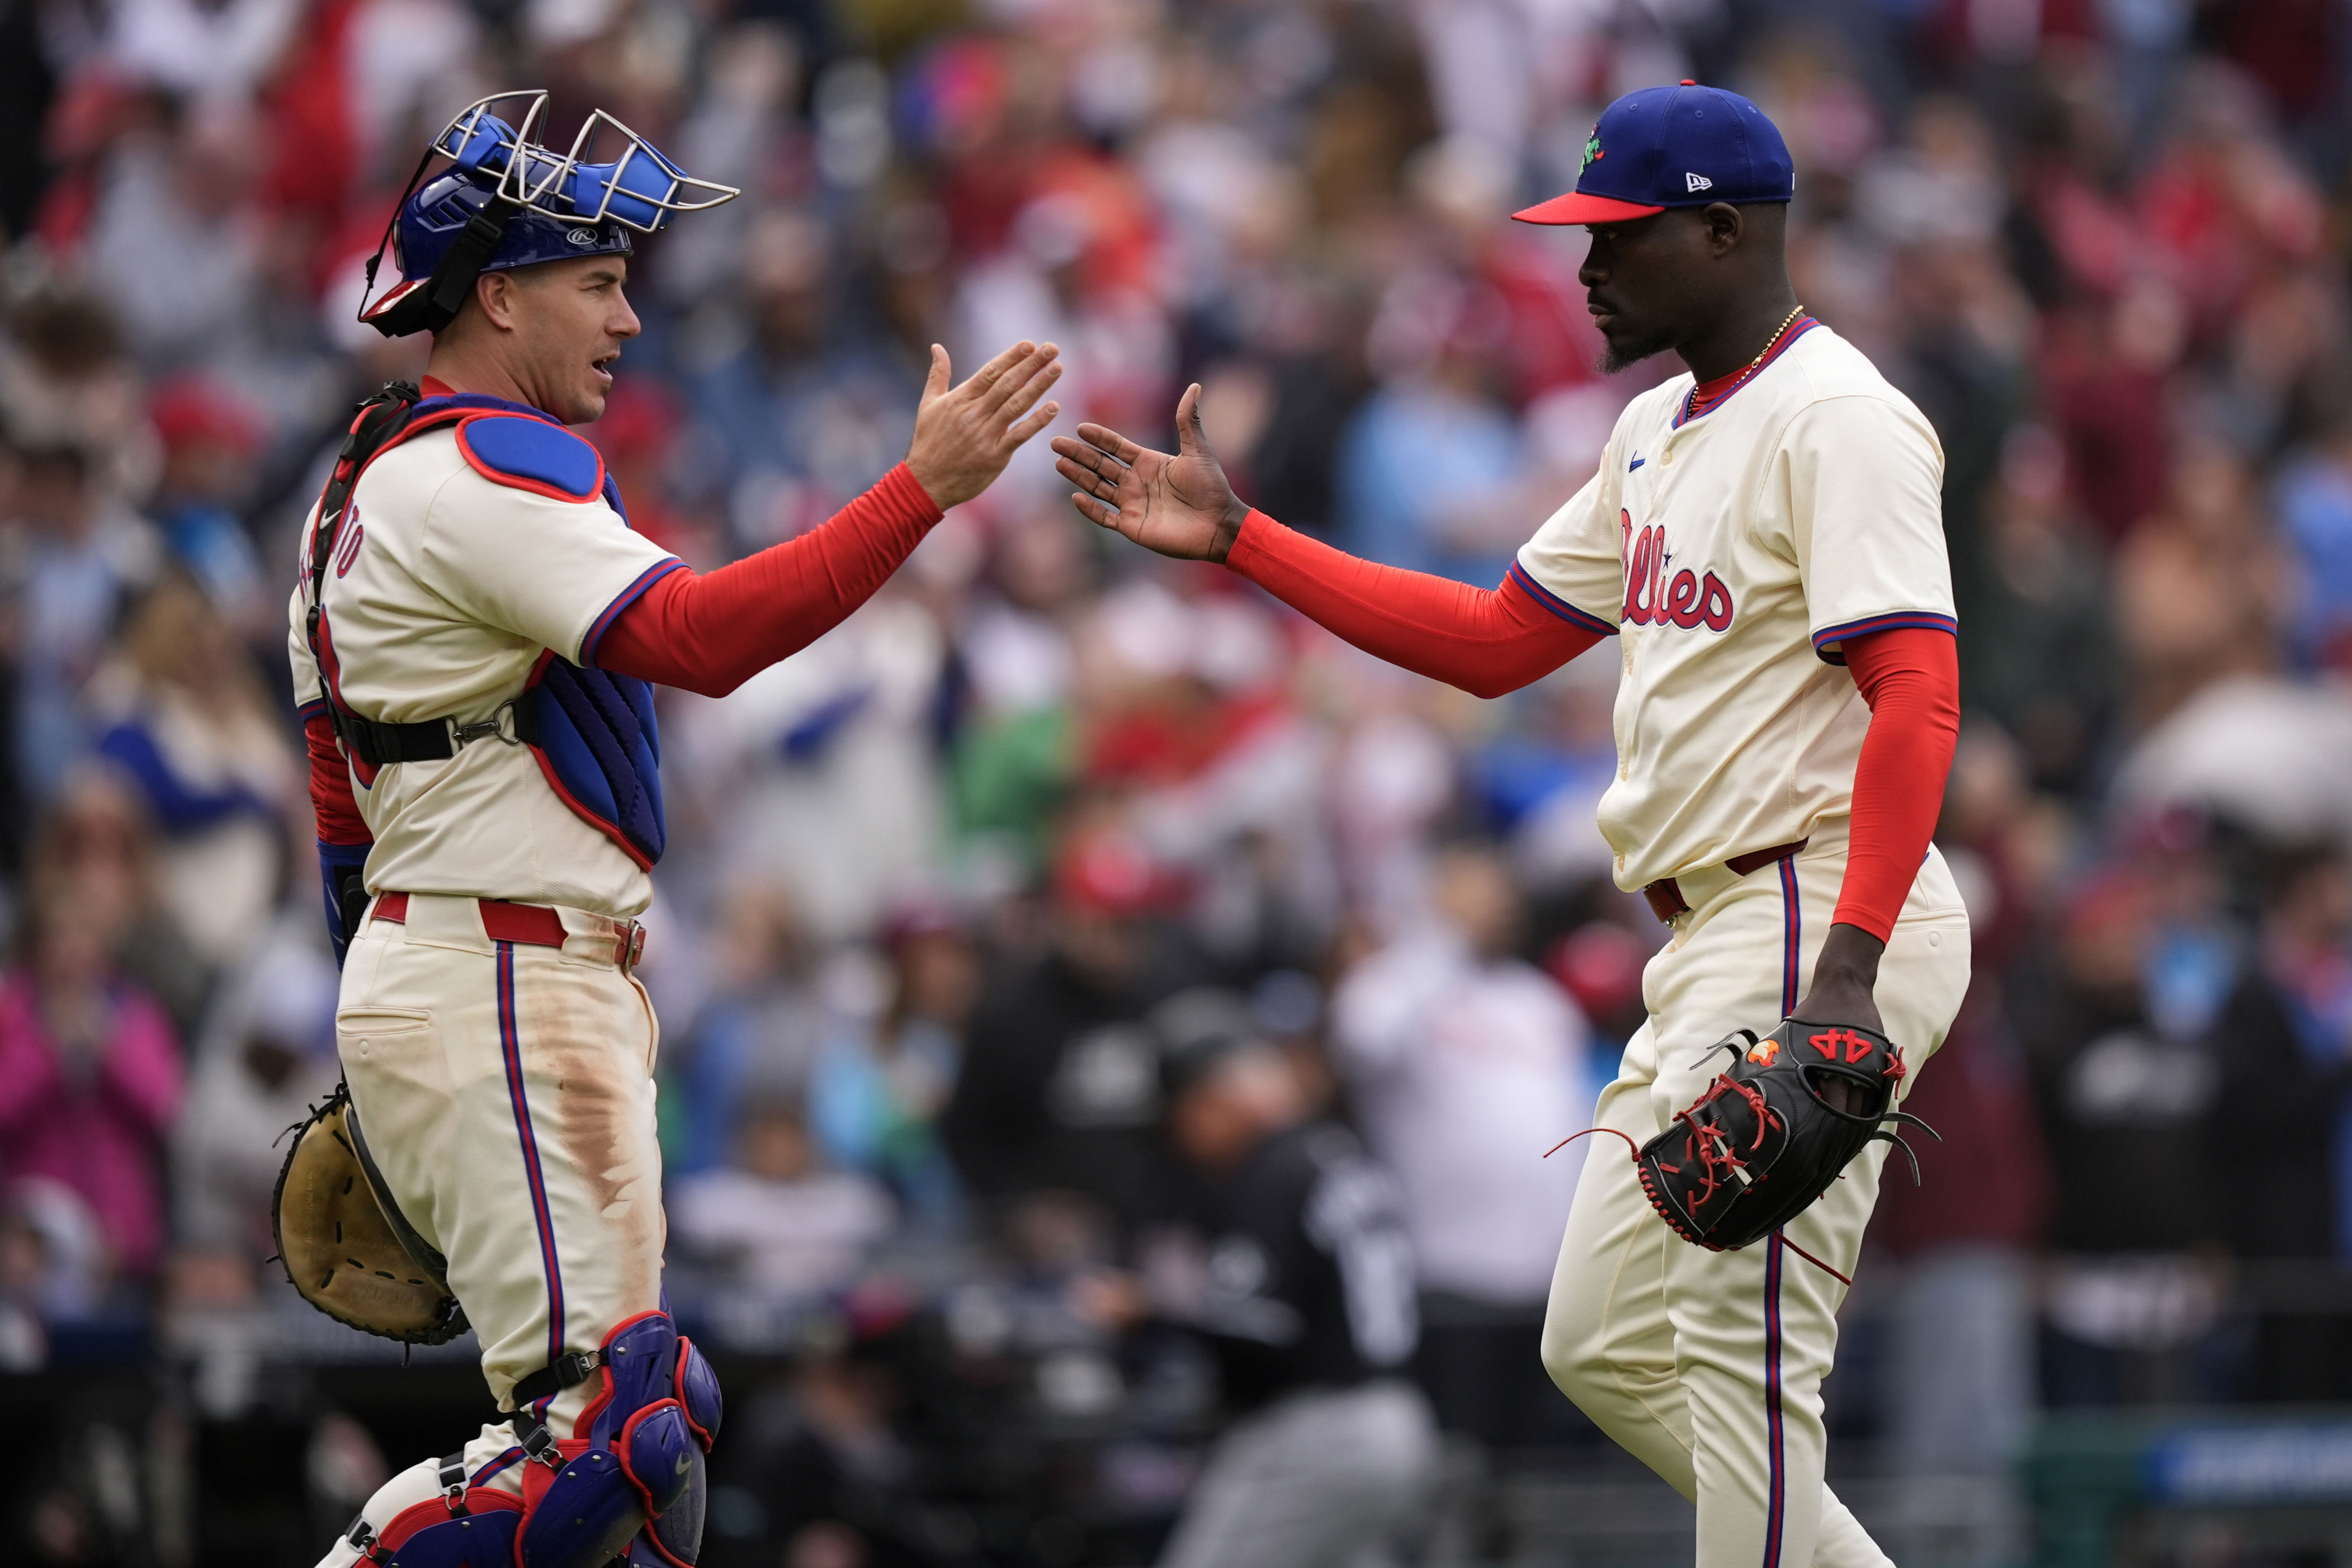 sizzling phillies finish homestand 8-2 with sweeps of white sox, rockies